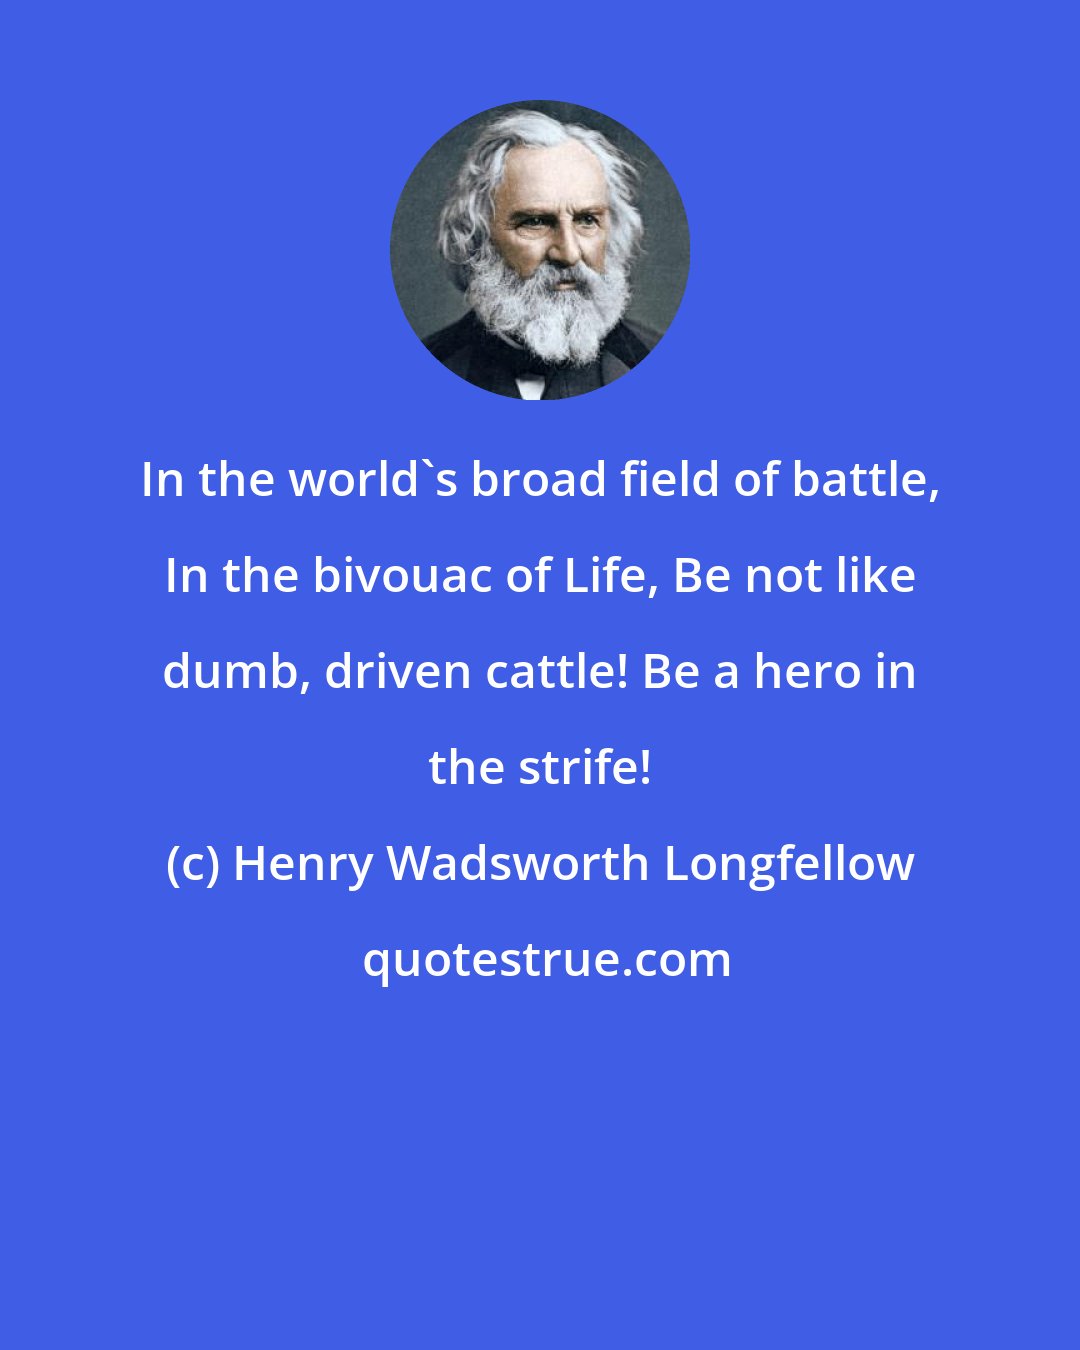 Henry Wadsworth Longfellow: In the world's broad field of battle, In the bivouac of Life, Be not like dumb, driven cattle! Be a hero in the strife!